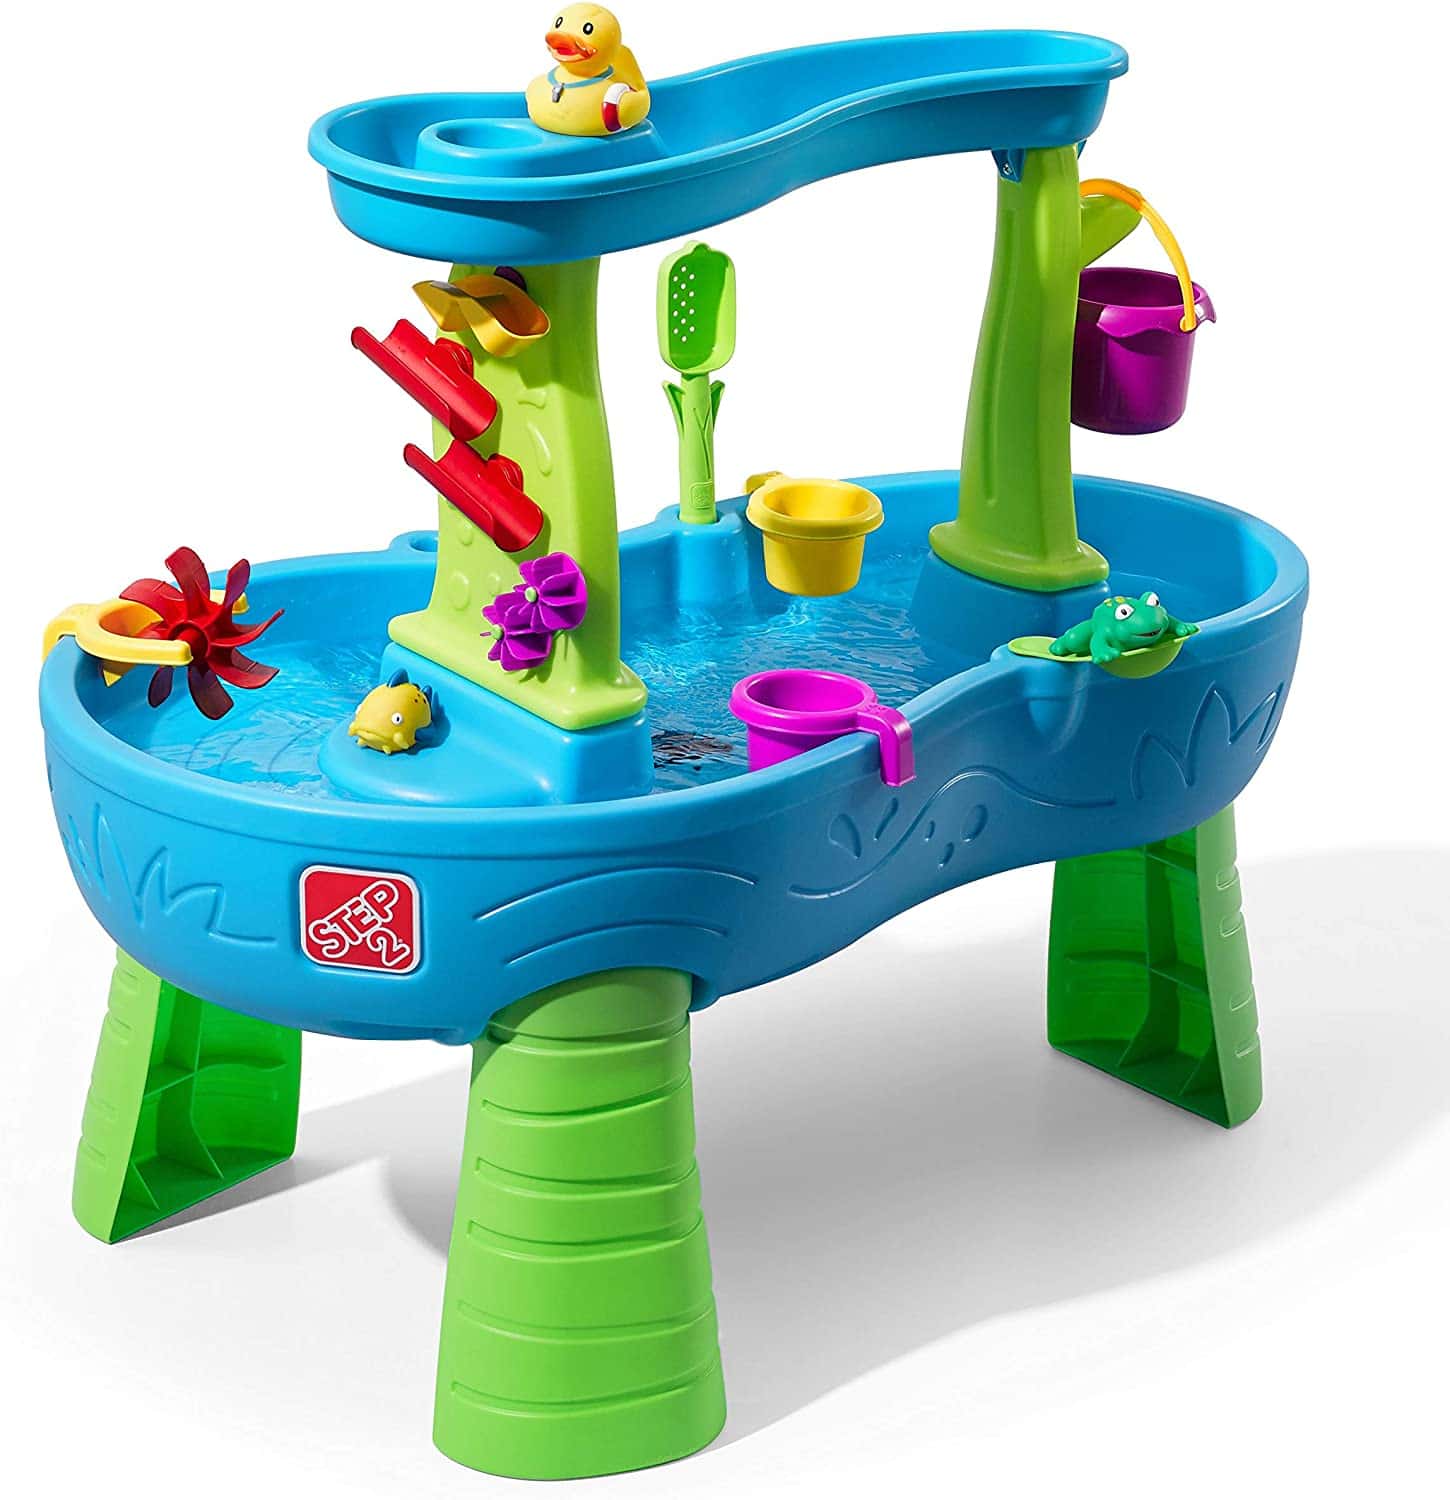 Outdoor Toys for Toddlers